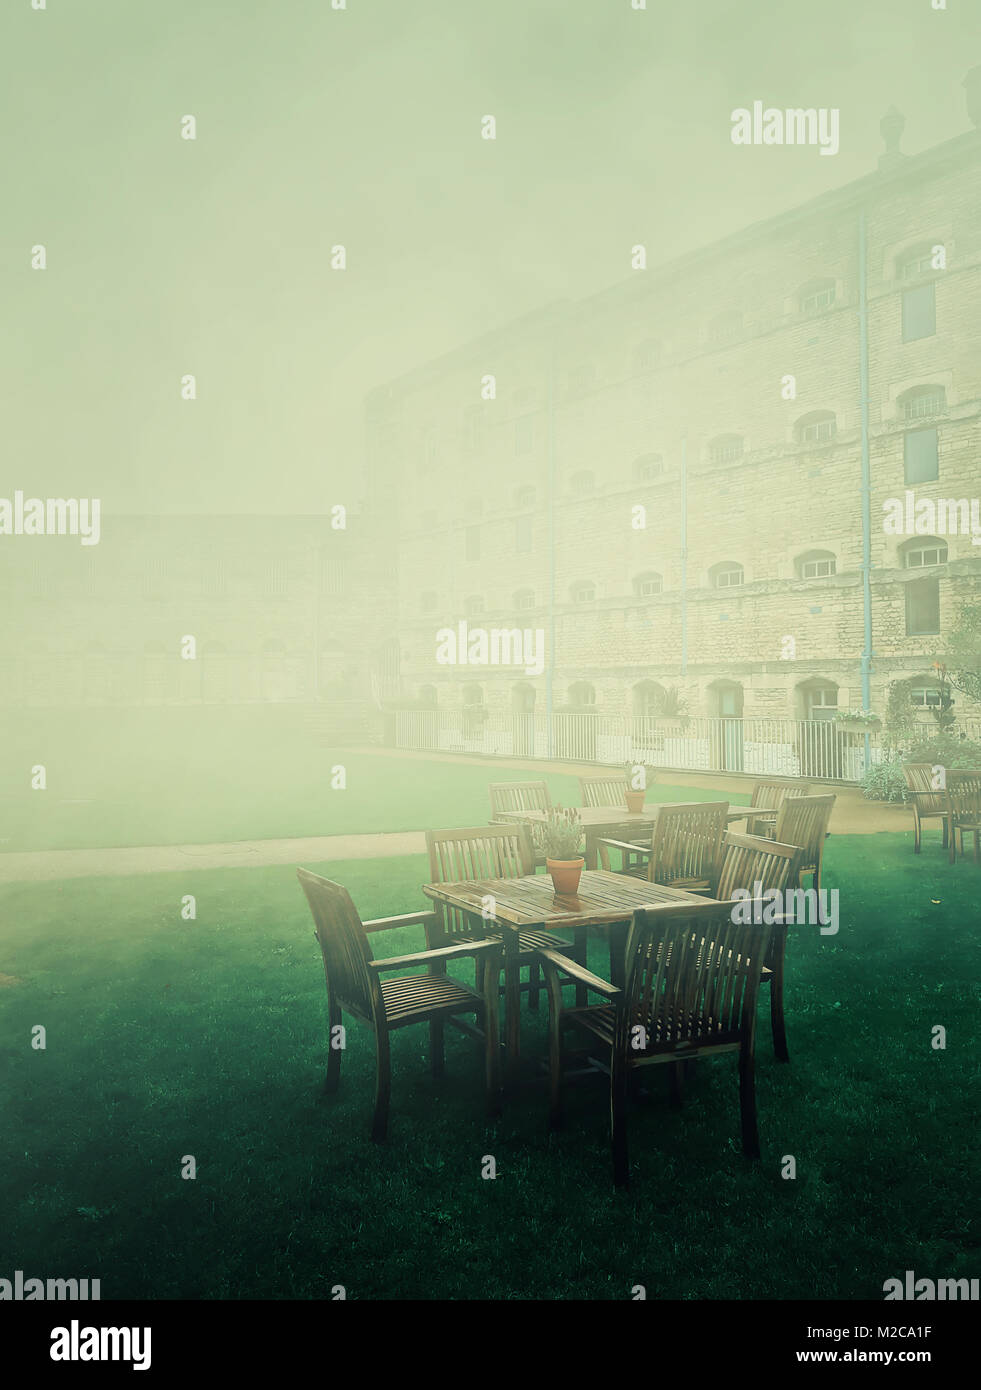 Oxford catle garden in a foggy english morning. Prison in the past and hotel in present. Stock Photo